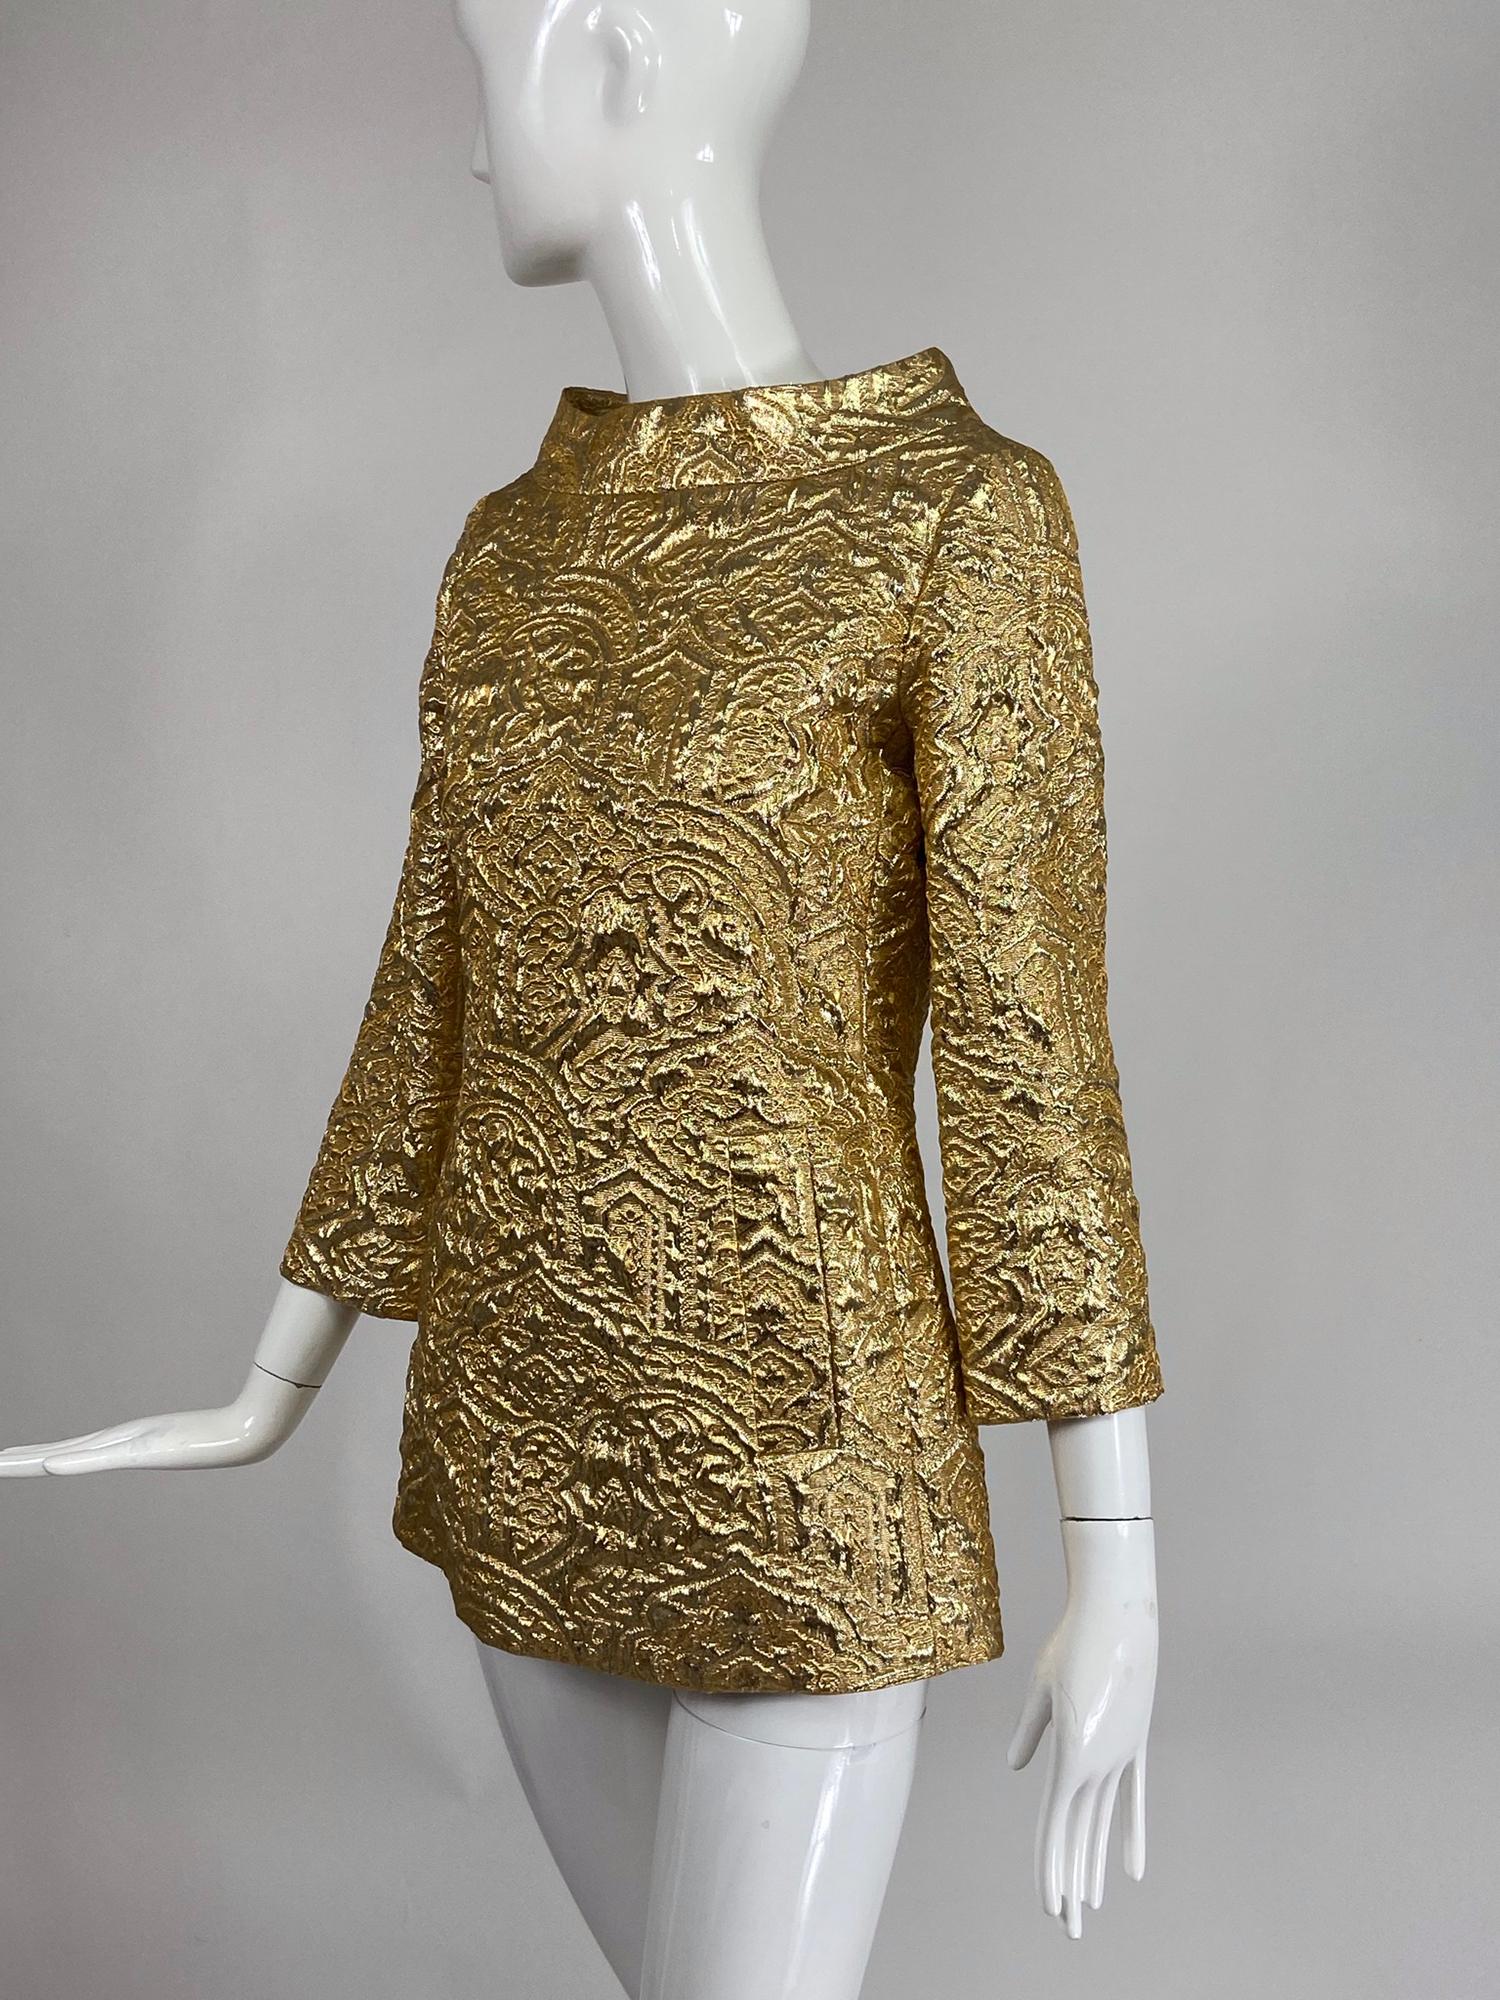 Michael Kors gold metallic brocade tunic top. Michael Kors take on a 60s favourite, stand away neckline tunic with bracelet length sleeves and a fitted A line shape, hip front faux pockets. Perfect to pair with fitted trousers or skirts mini or